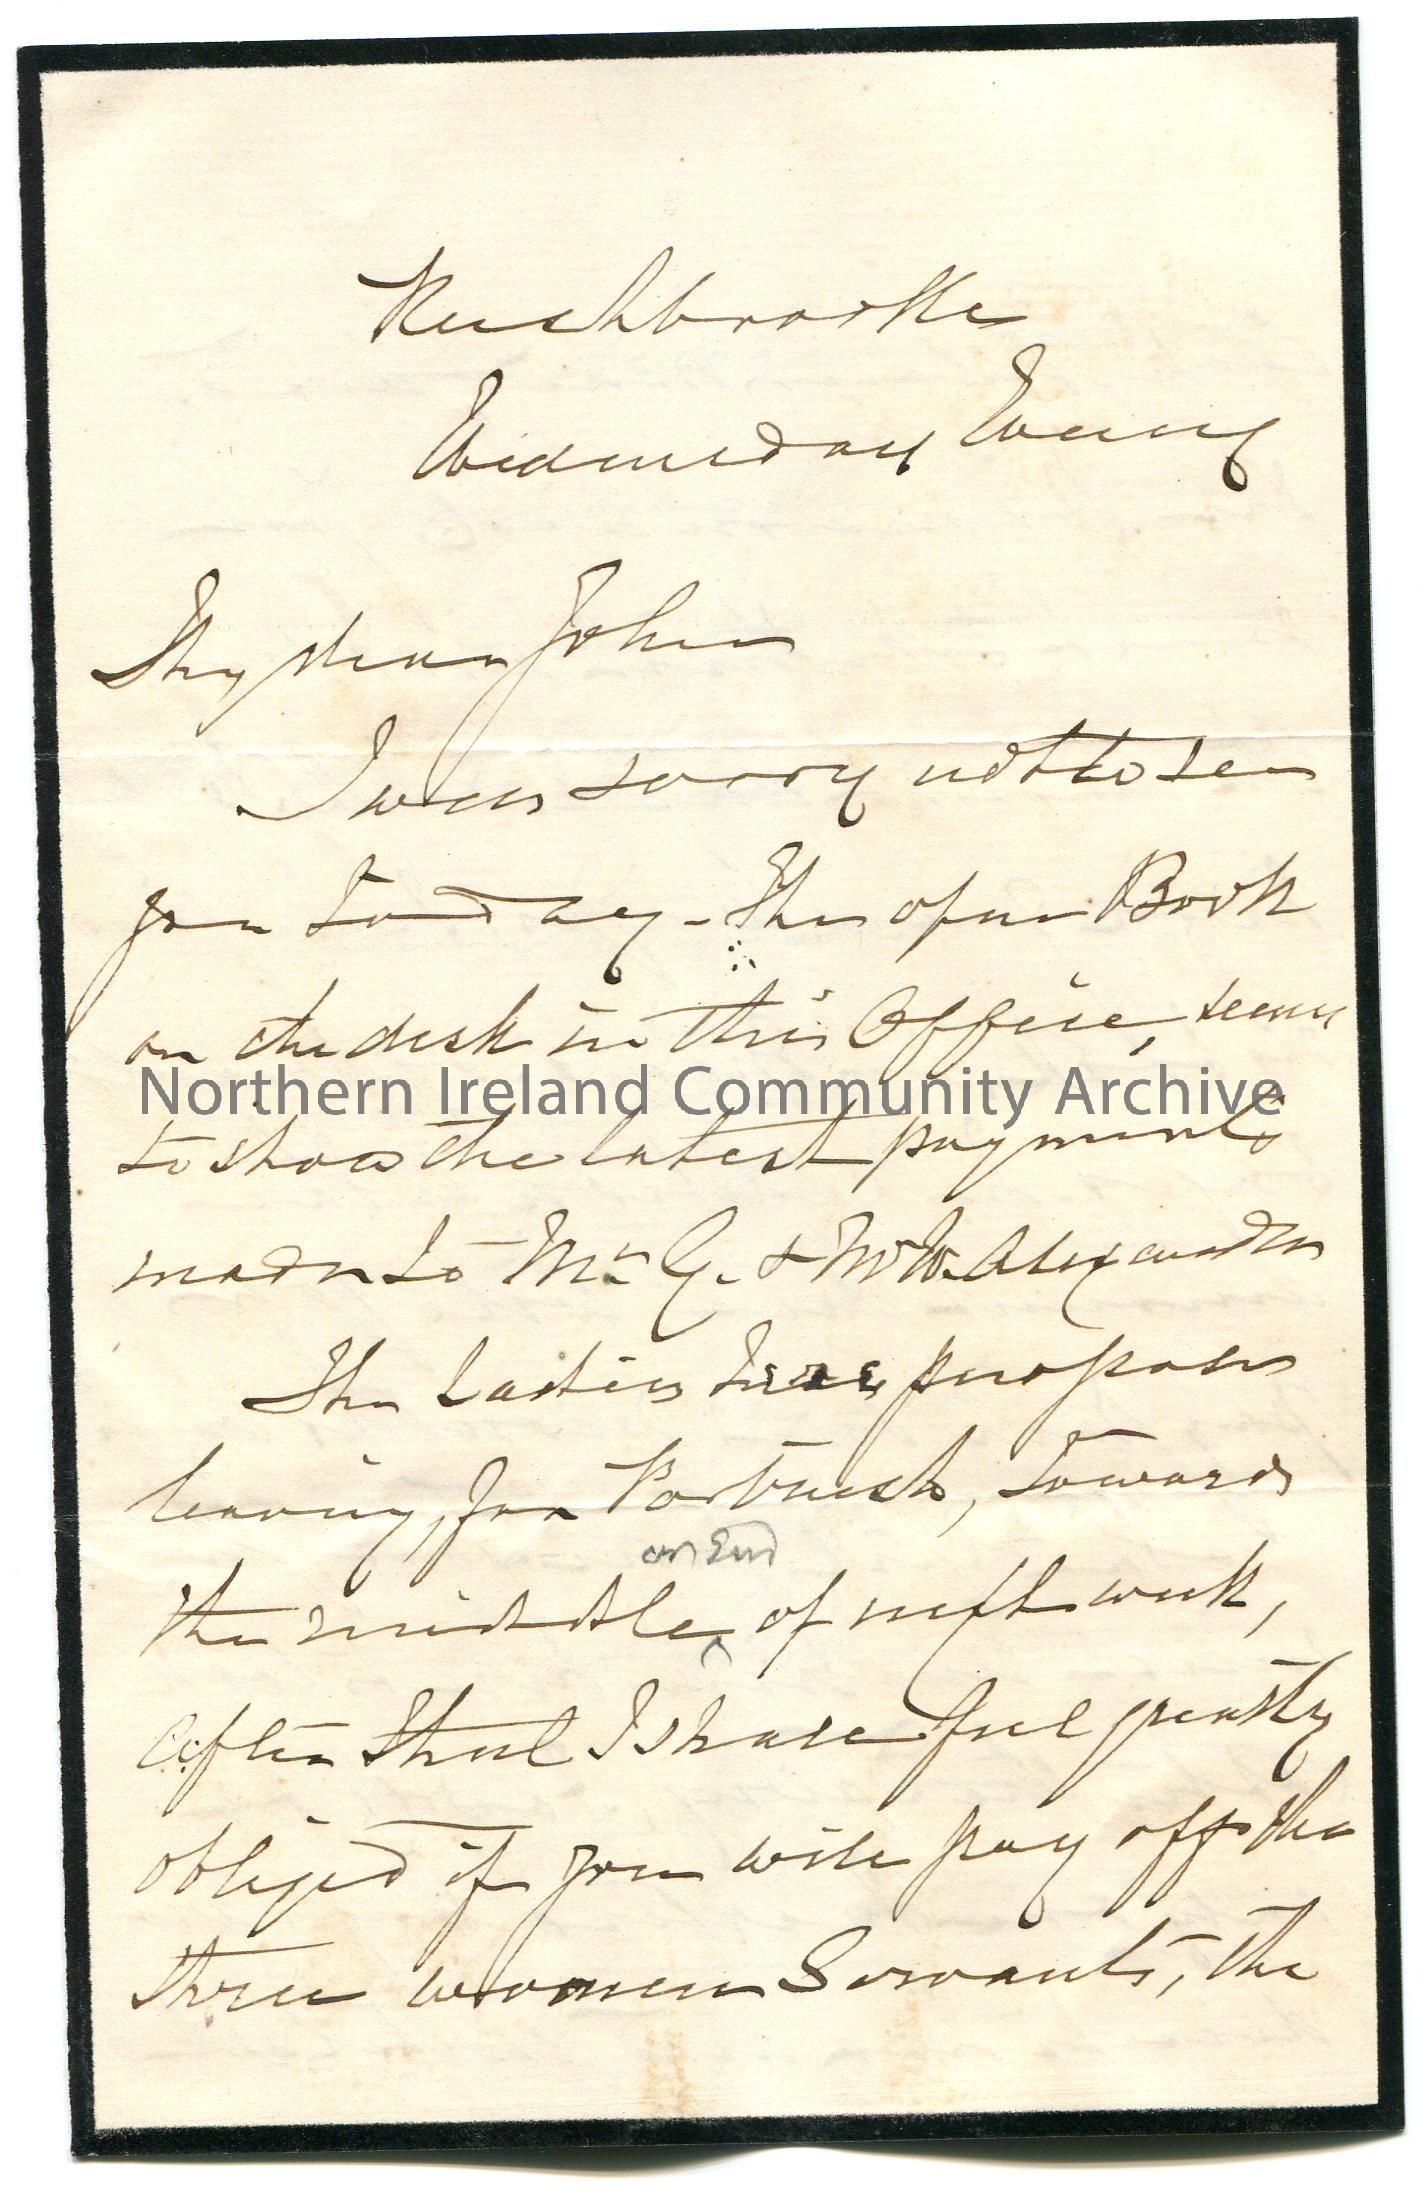 Handwritten letter to ‘My Dear John’. (folded and written on three sides on mourning paper with black edging). Mentions leaving Portrush in the middle…